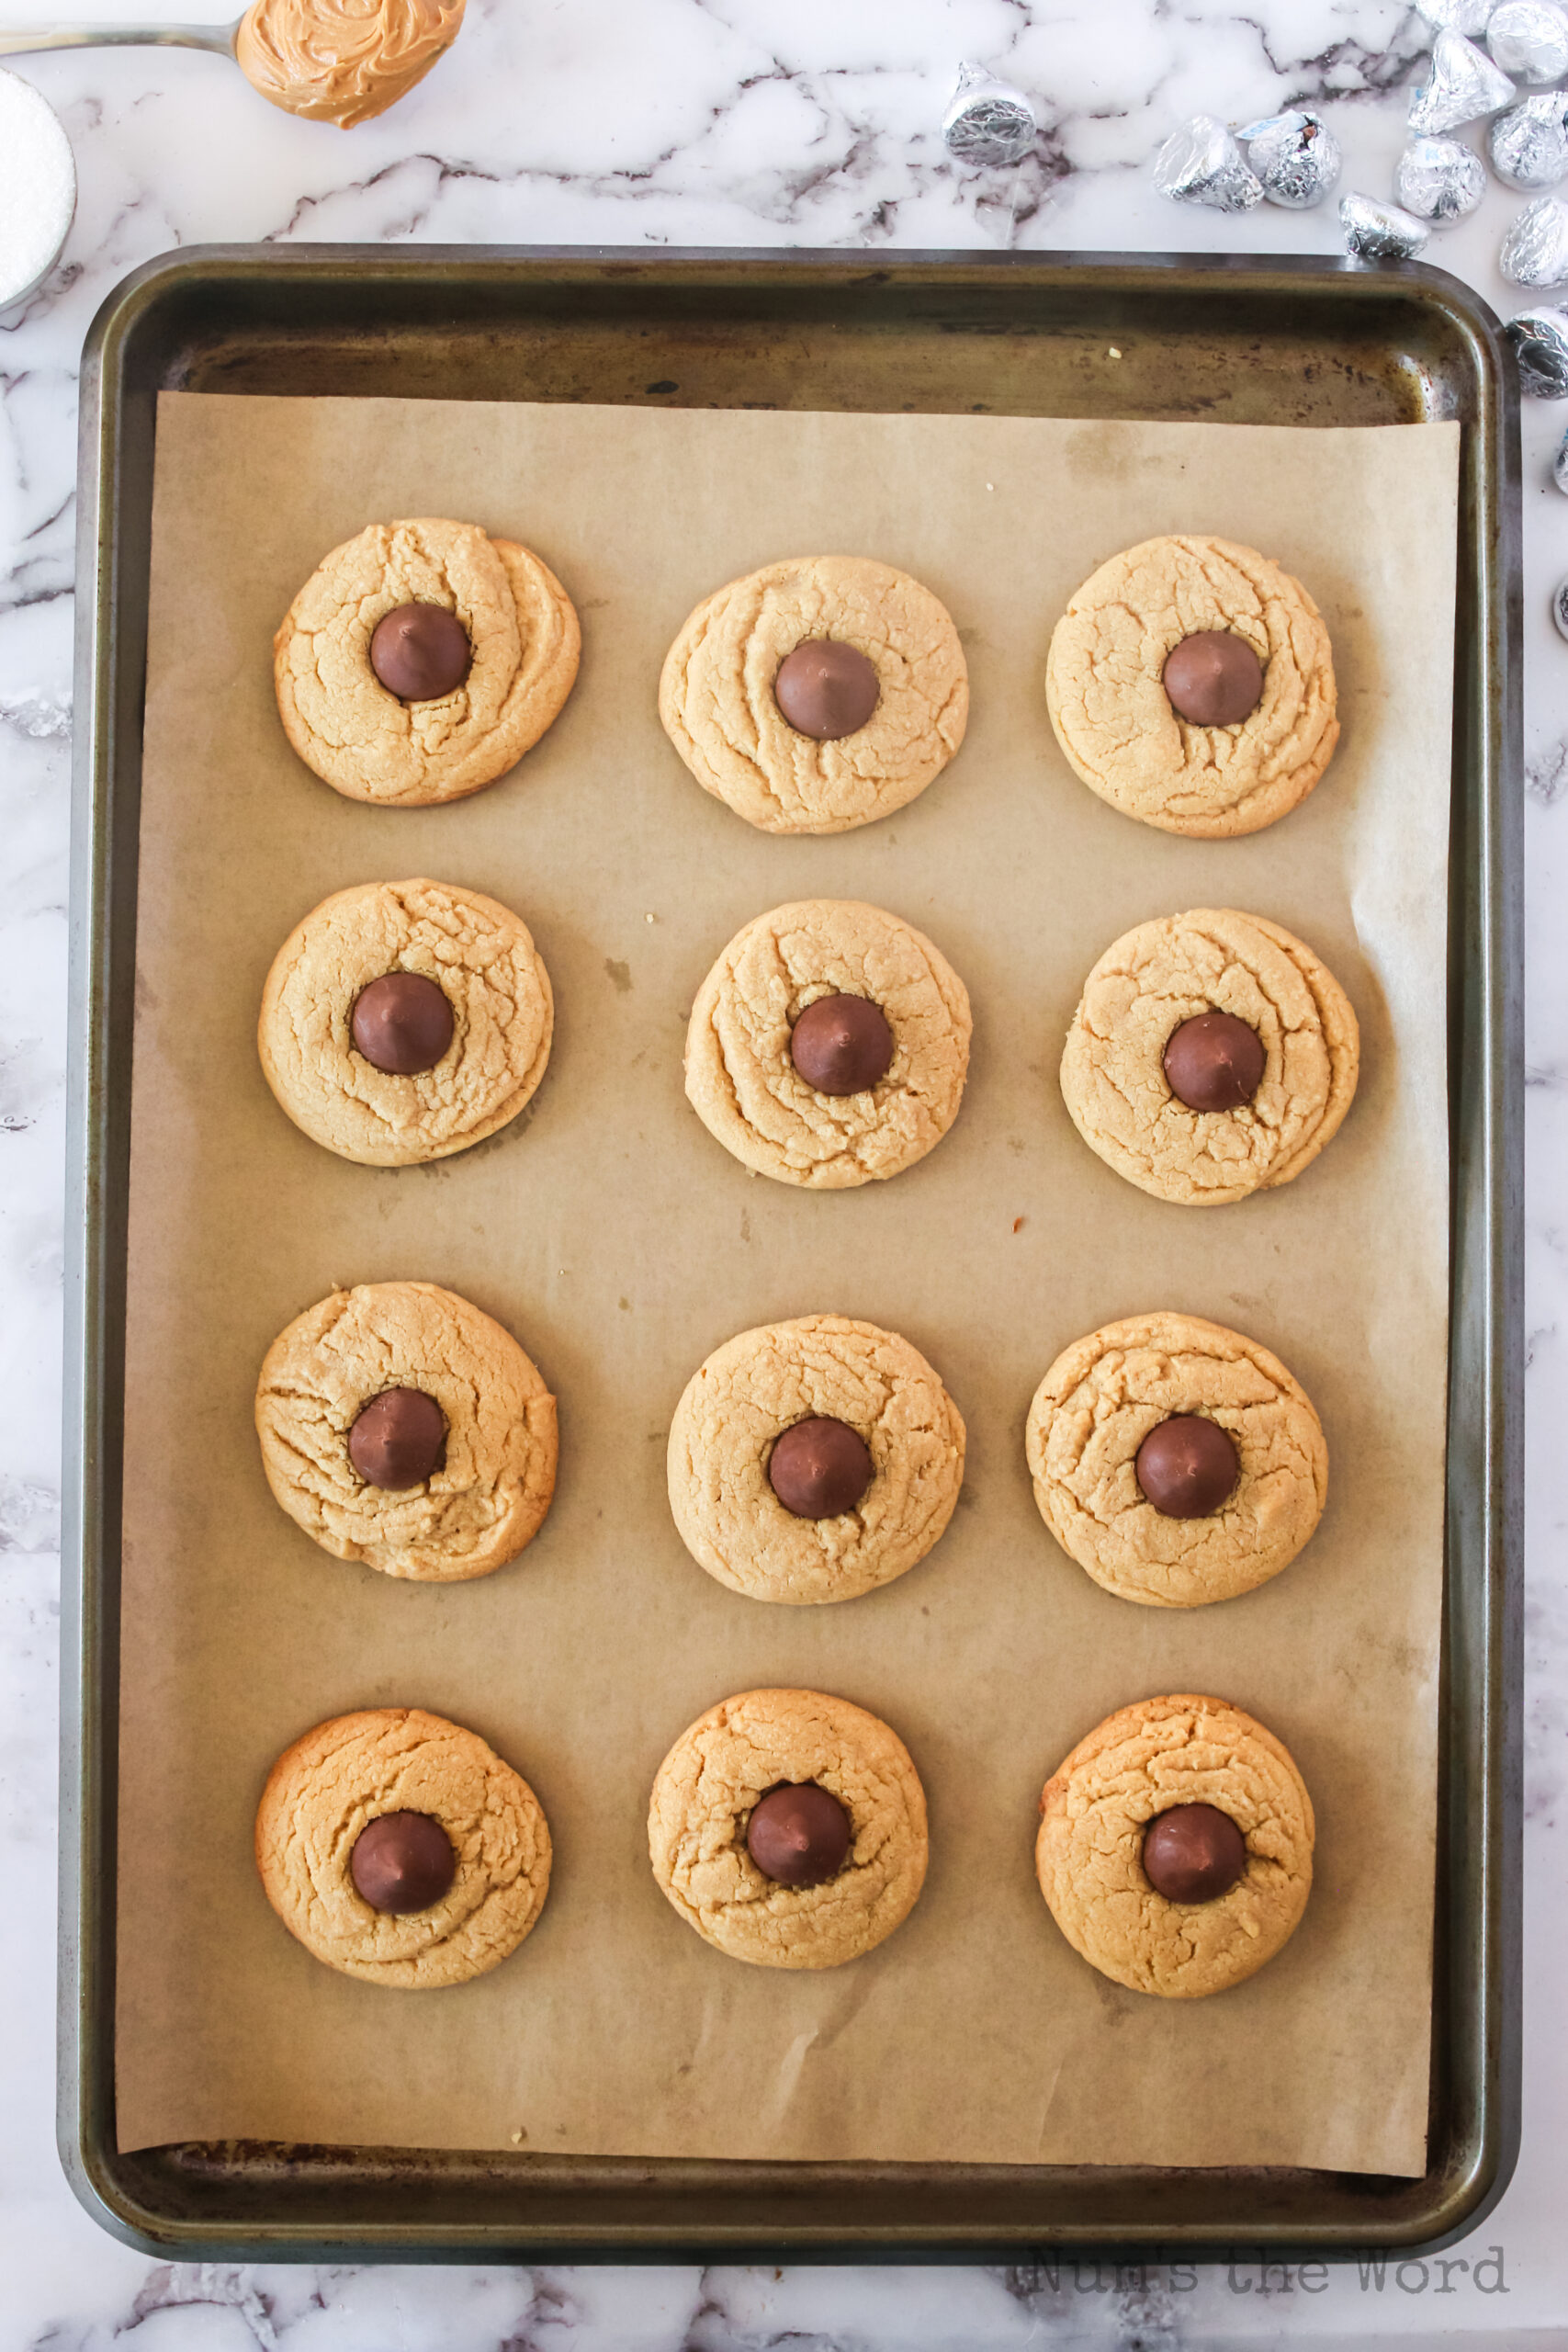 fresh baked cookies on pan with a kiss pressed into the center of each cookie